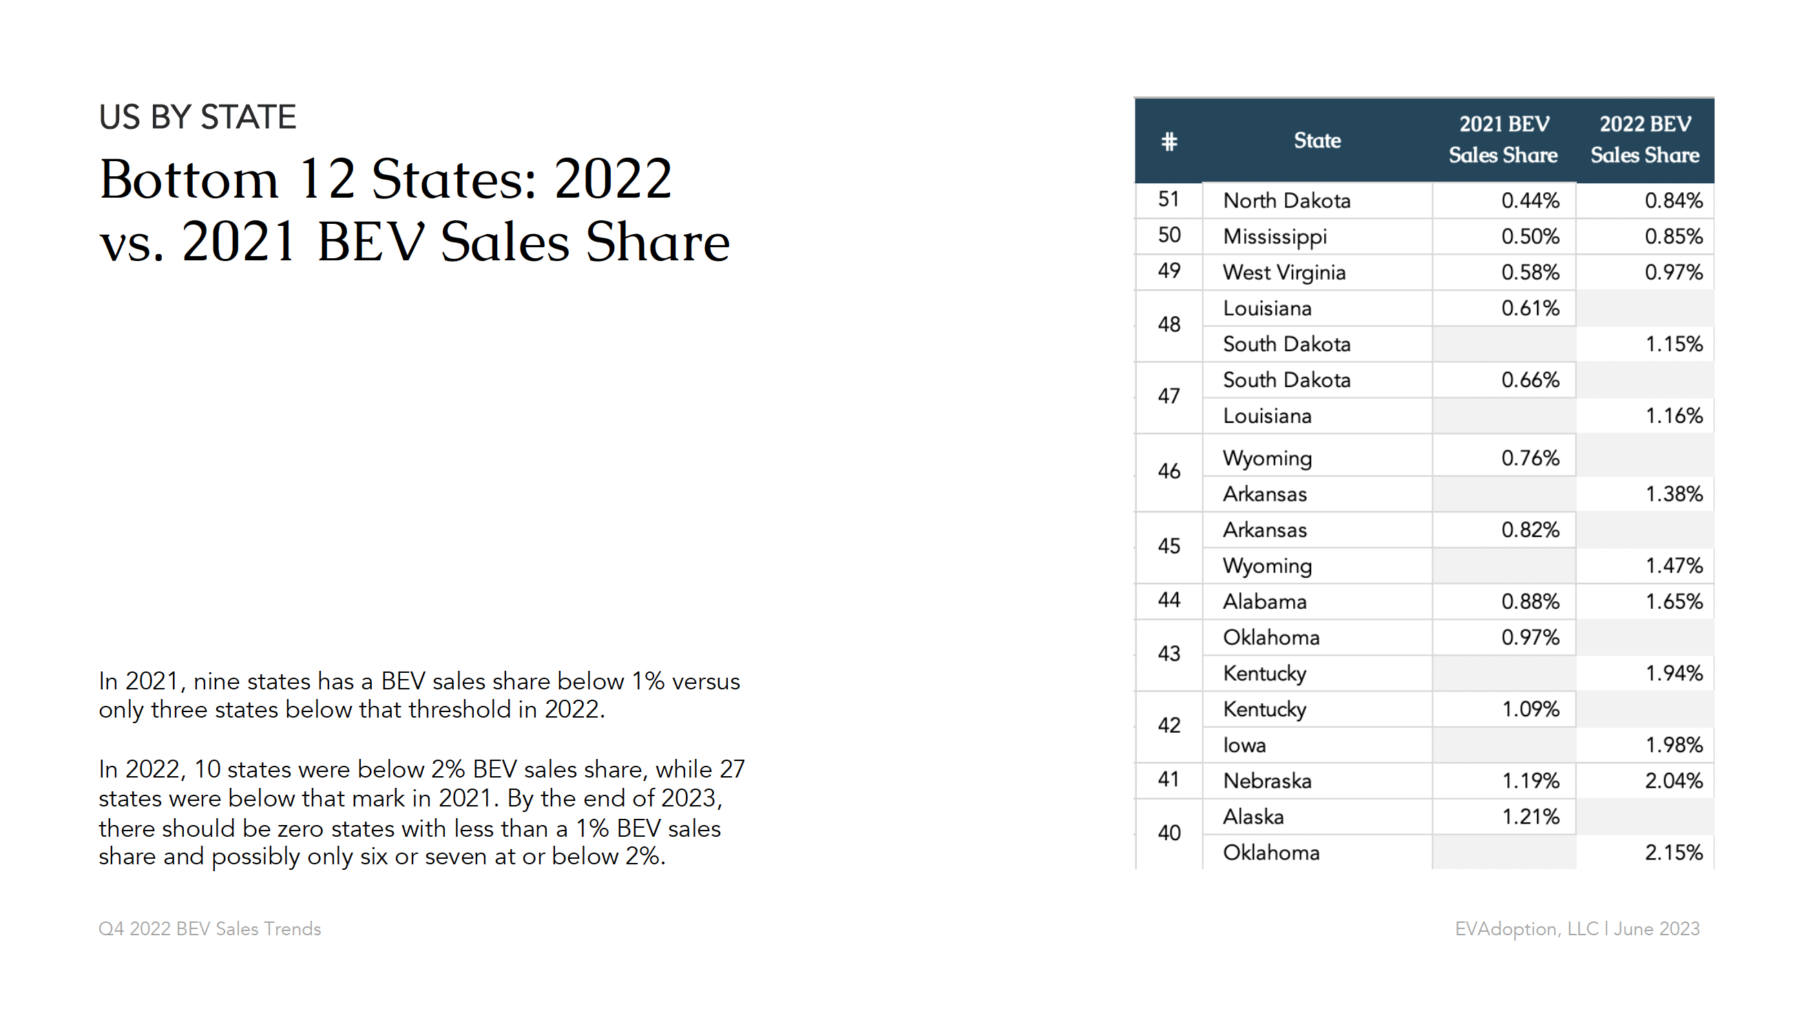 US By State | Bottom 12 States 2022 vs. 2021 BEV Sales Share